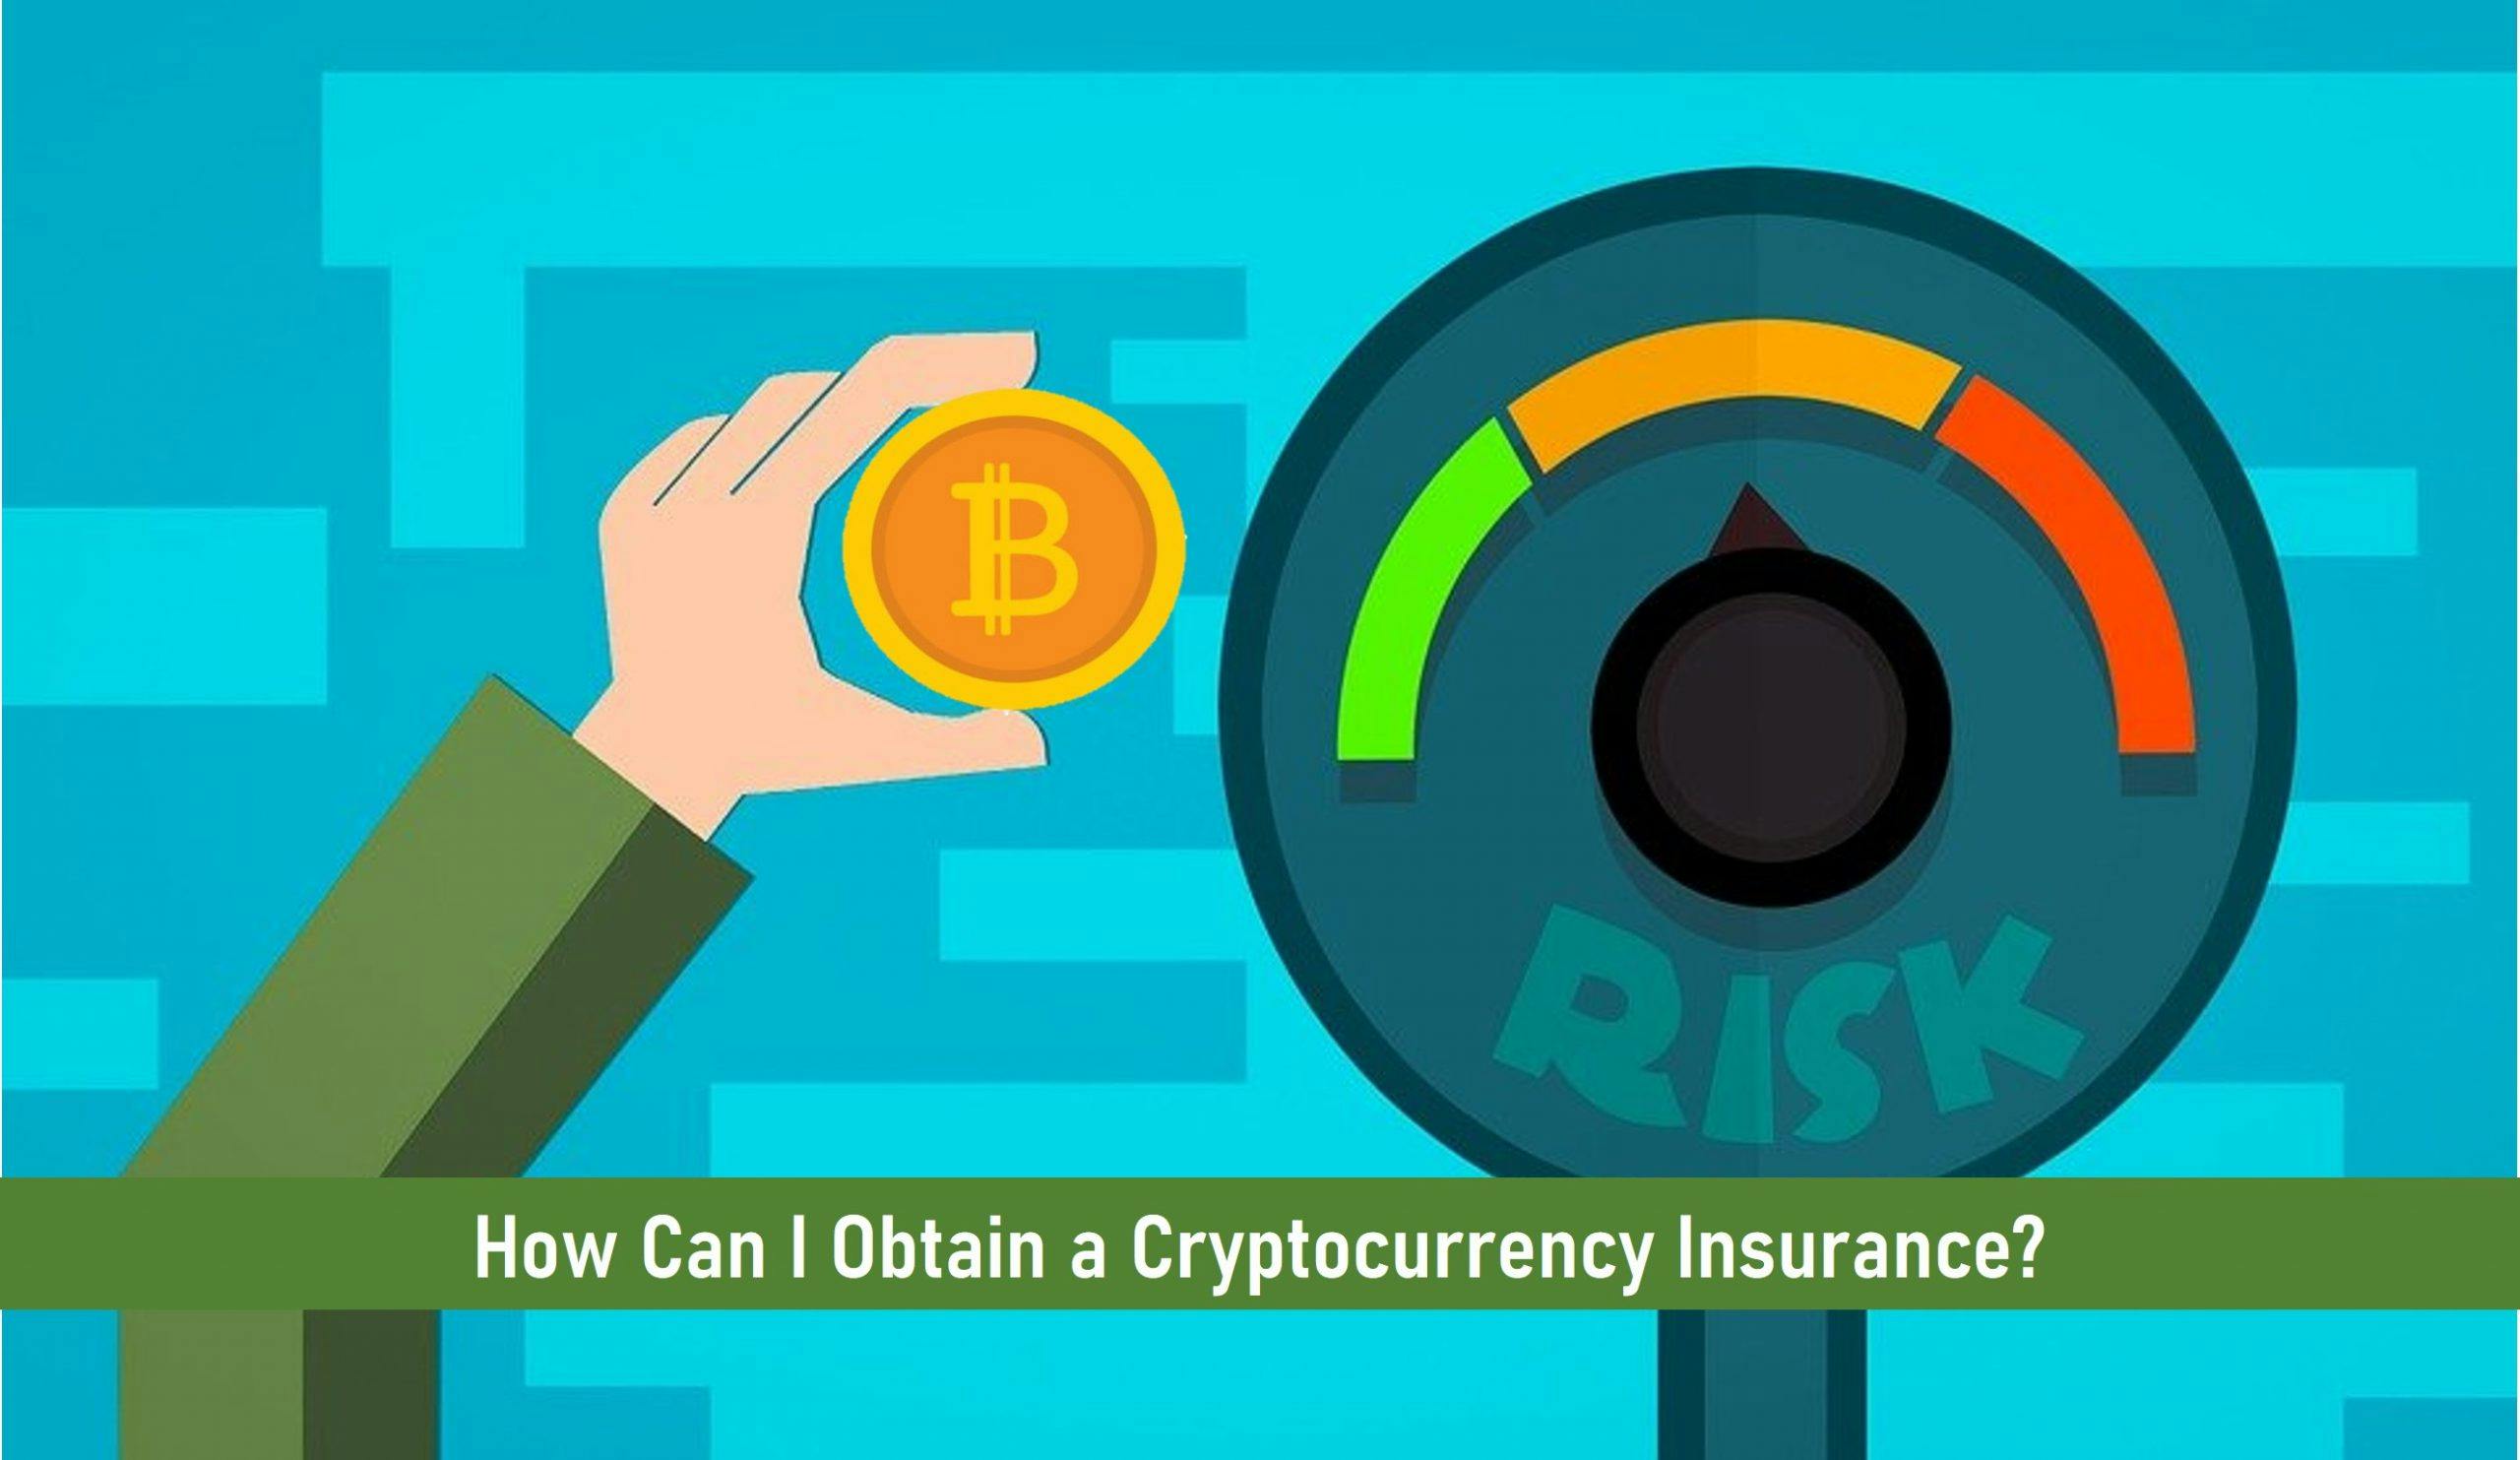 How Can I Obtain a Cryptocurrency Insurance?